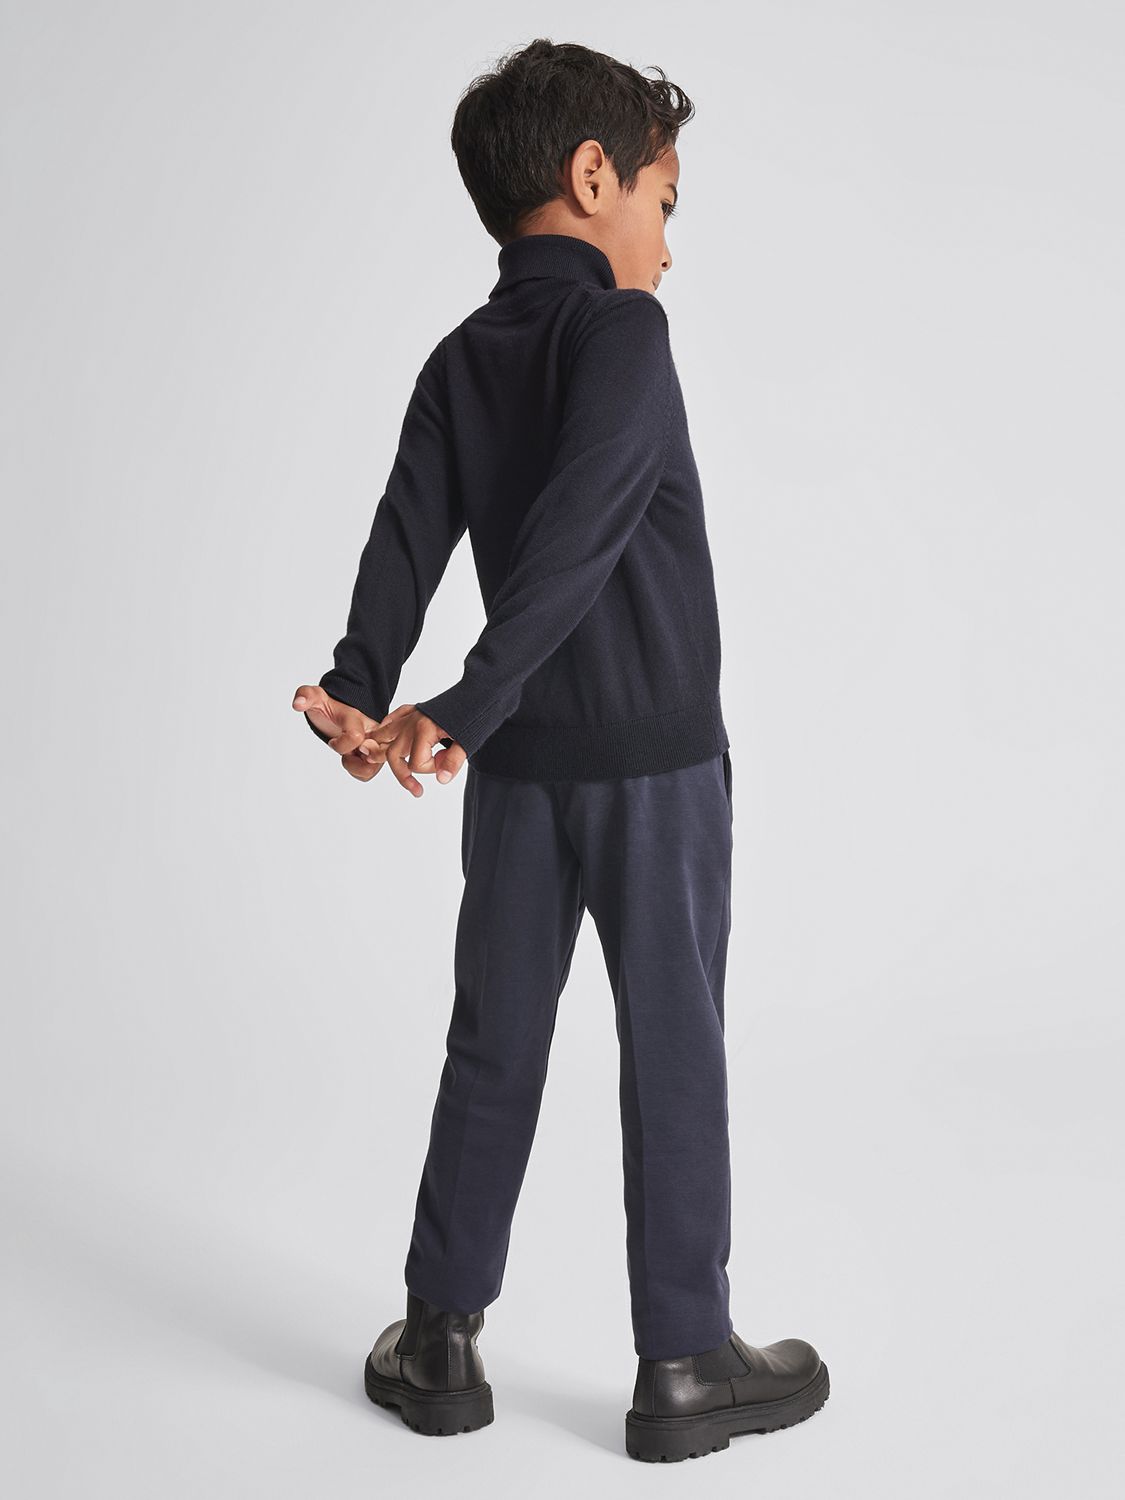 Buy Reiss Kids' Eastbury Stretch Chino Trousers Online at johnlewis.com